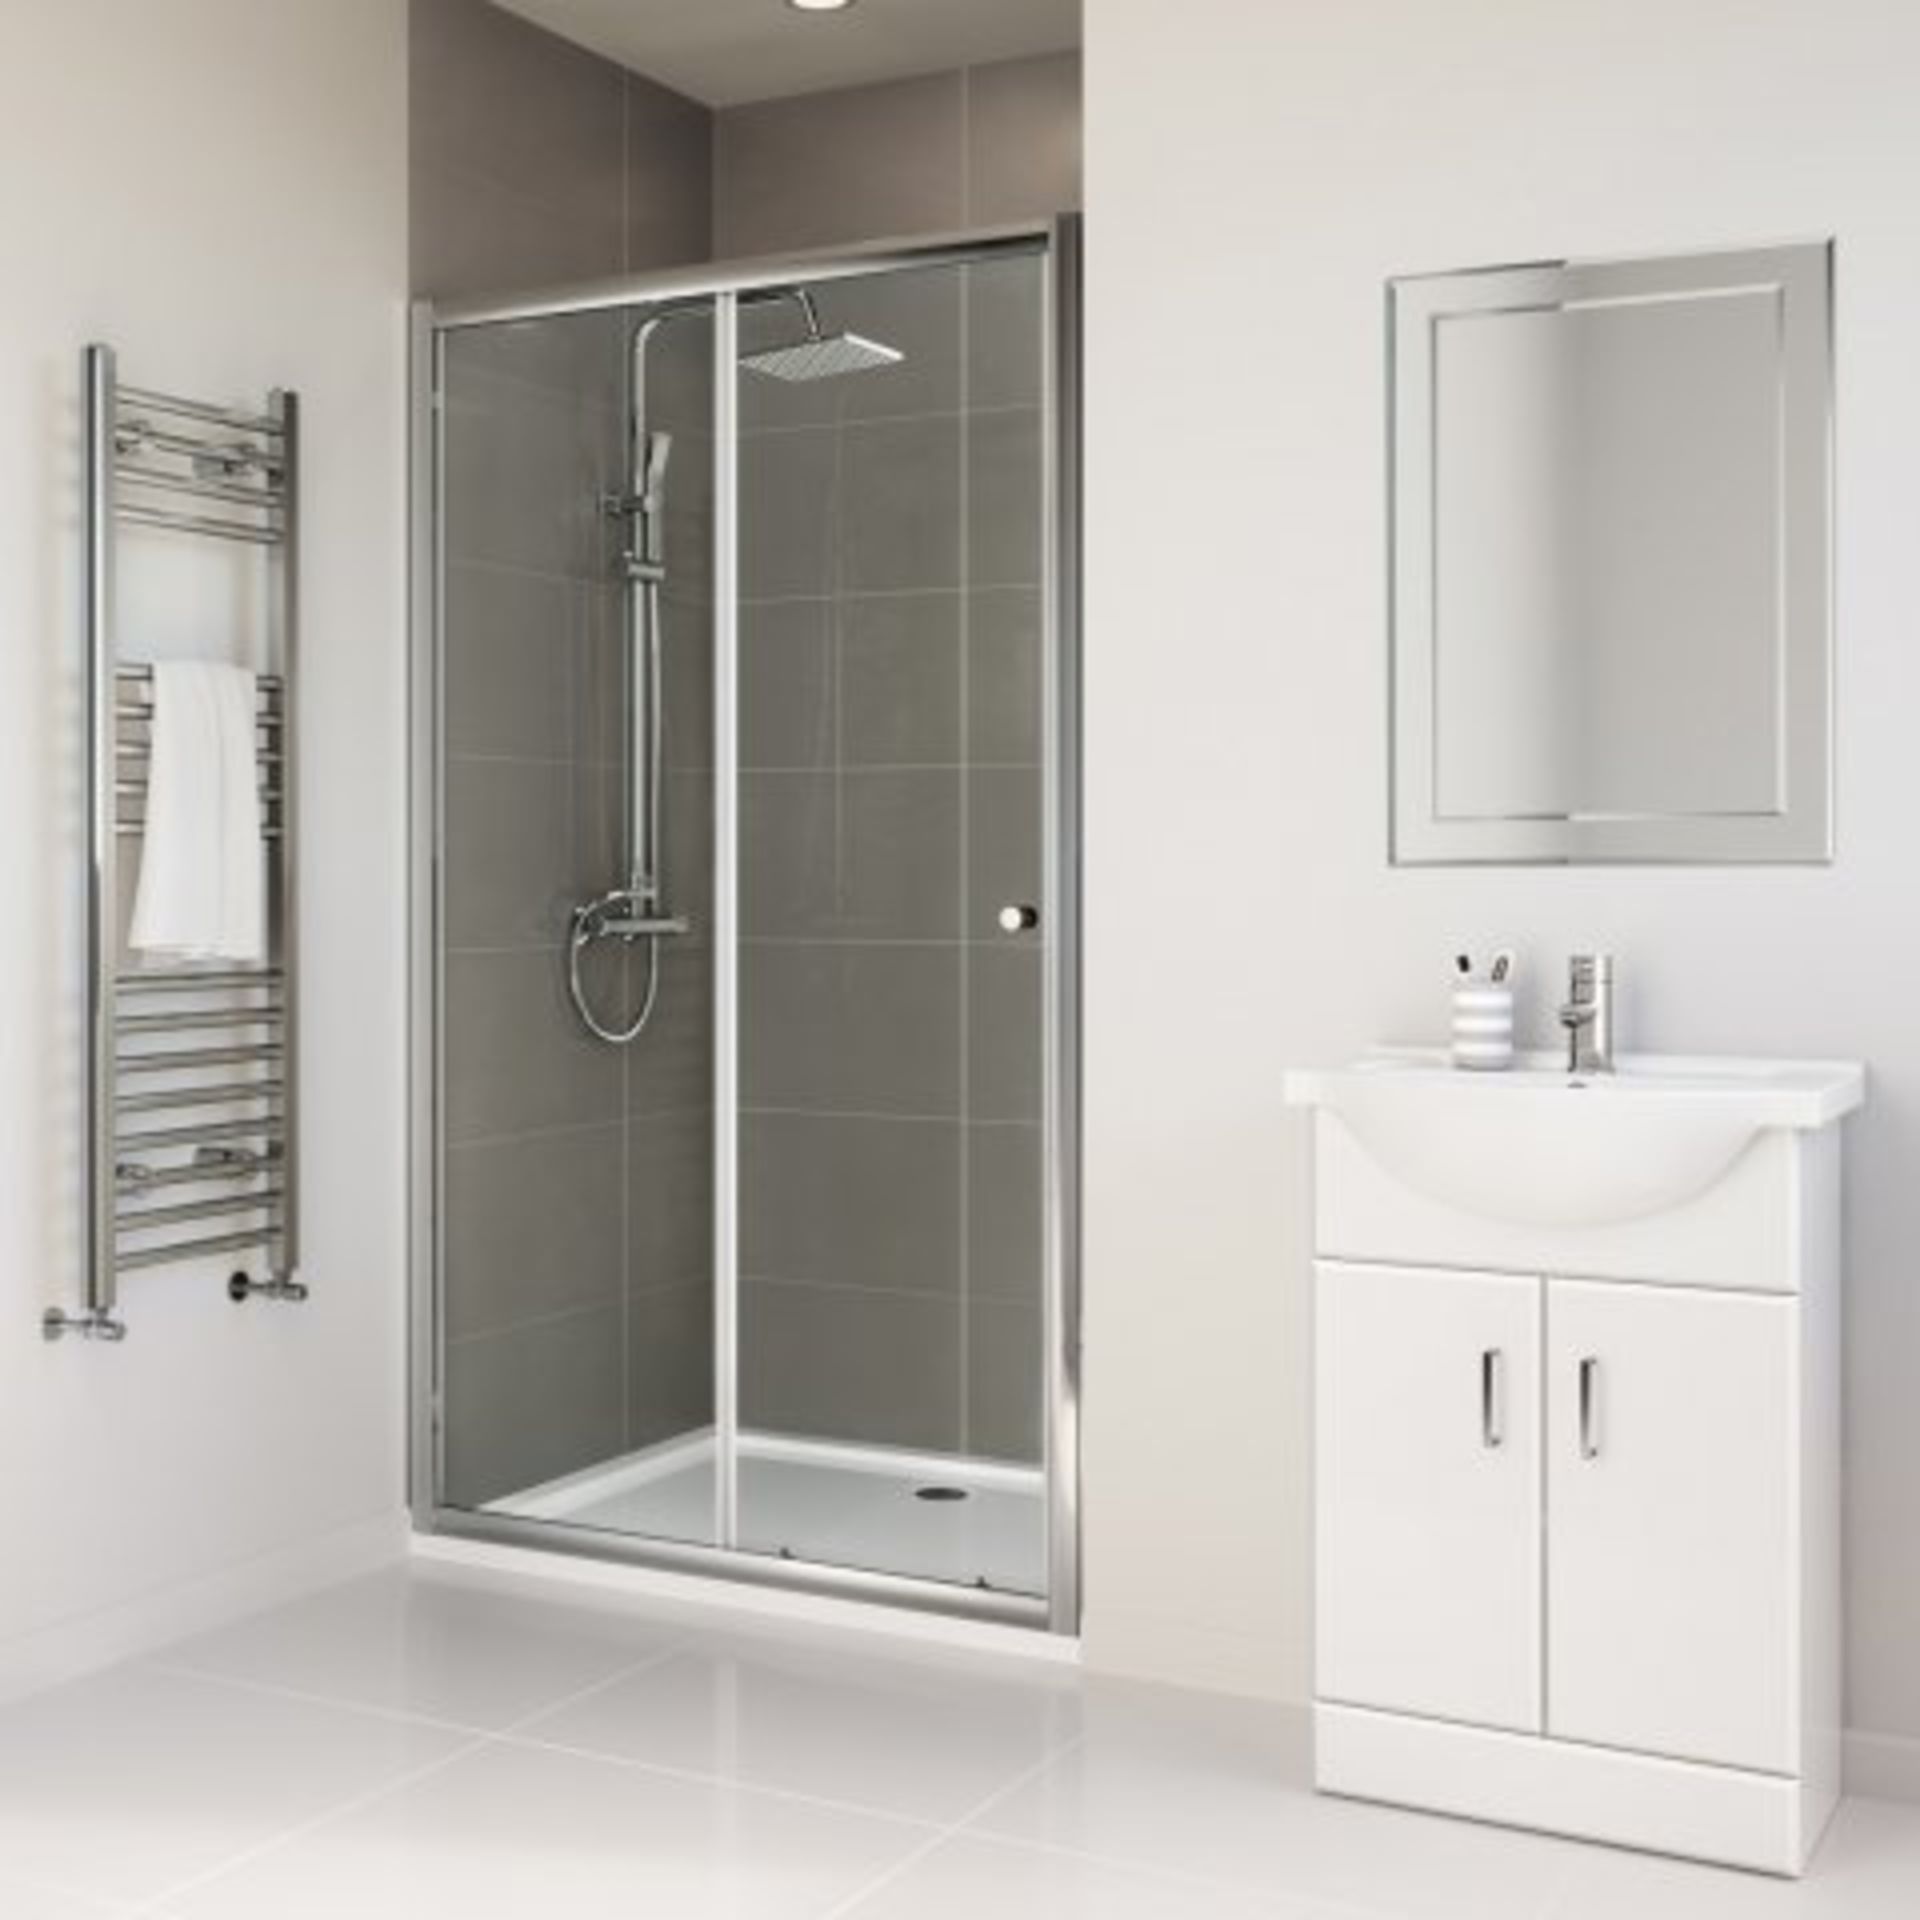 (O246) 1200mm - Elements Sliding Shower Door Designed and crafted to improve the decor of your - Image 3 of 3